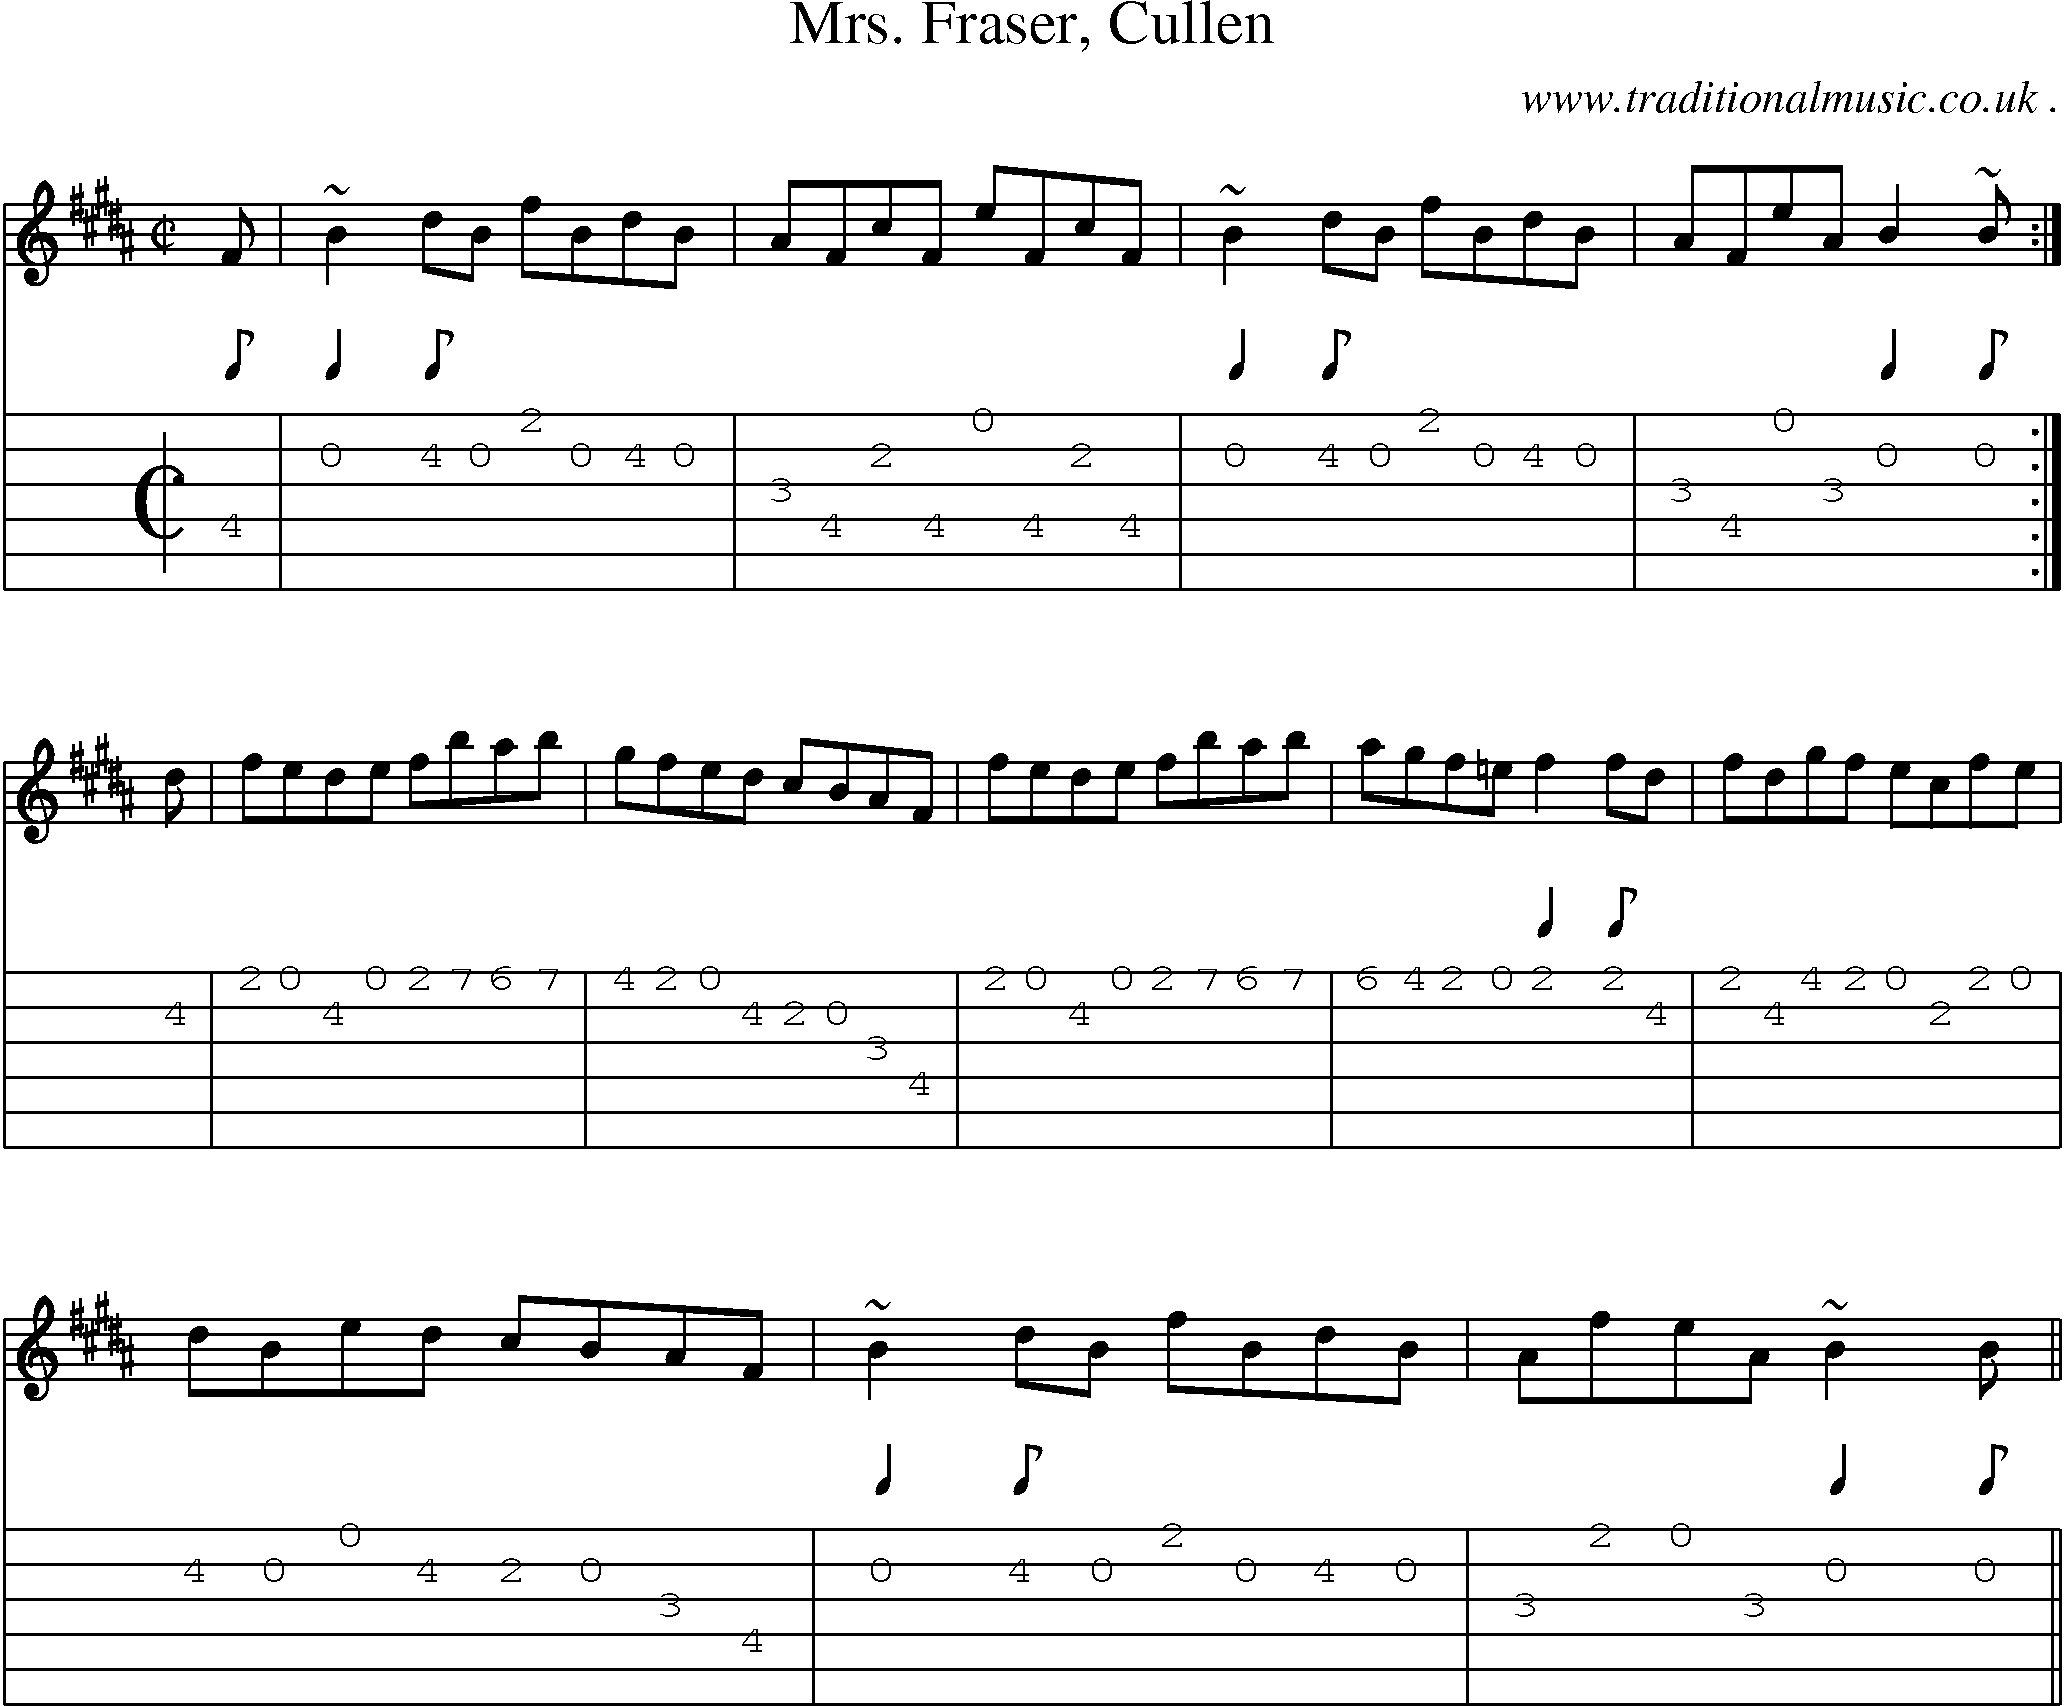 Sheet-music  score, Chords and Guitar Tabs for Mrs Fraser Cullen